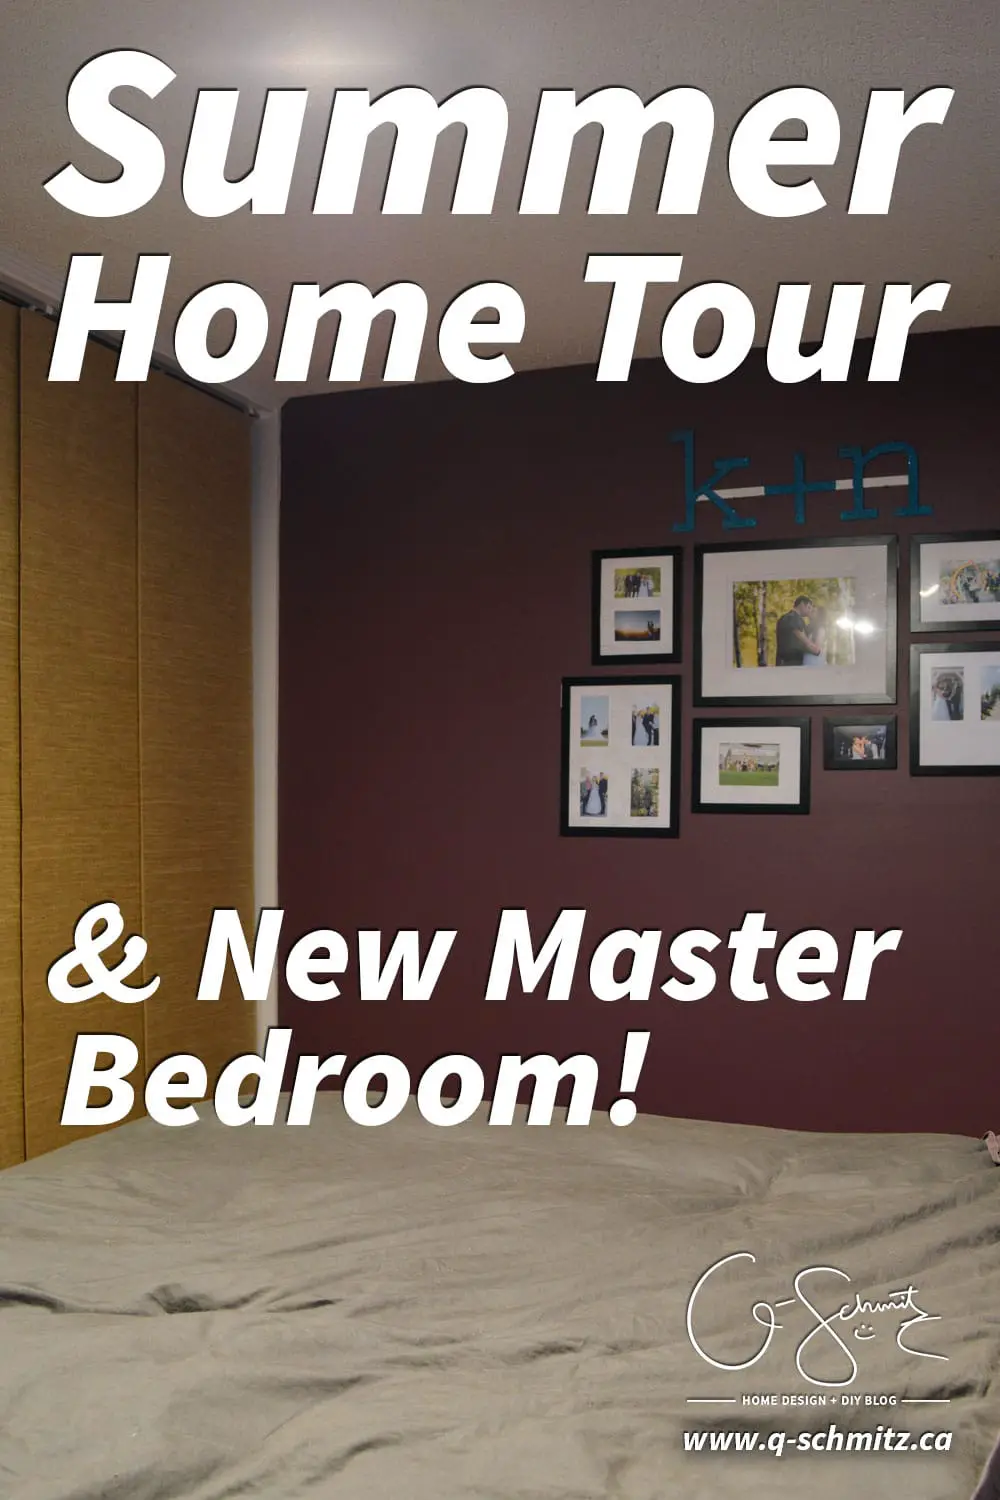 Today I'll be sharing photos of some different areas of my house, and most excitingly I'll be revealing our new Master Bedroom paint colour. Part of the summer home tour hosted by Green with Decor